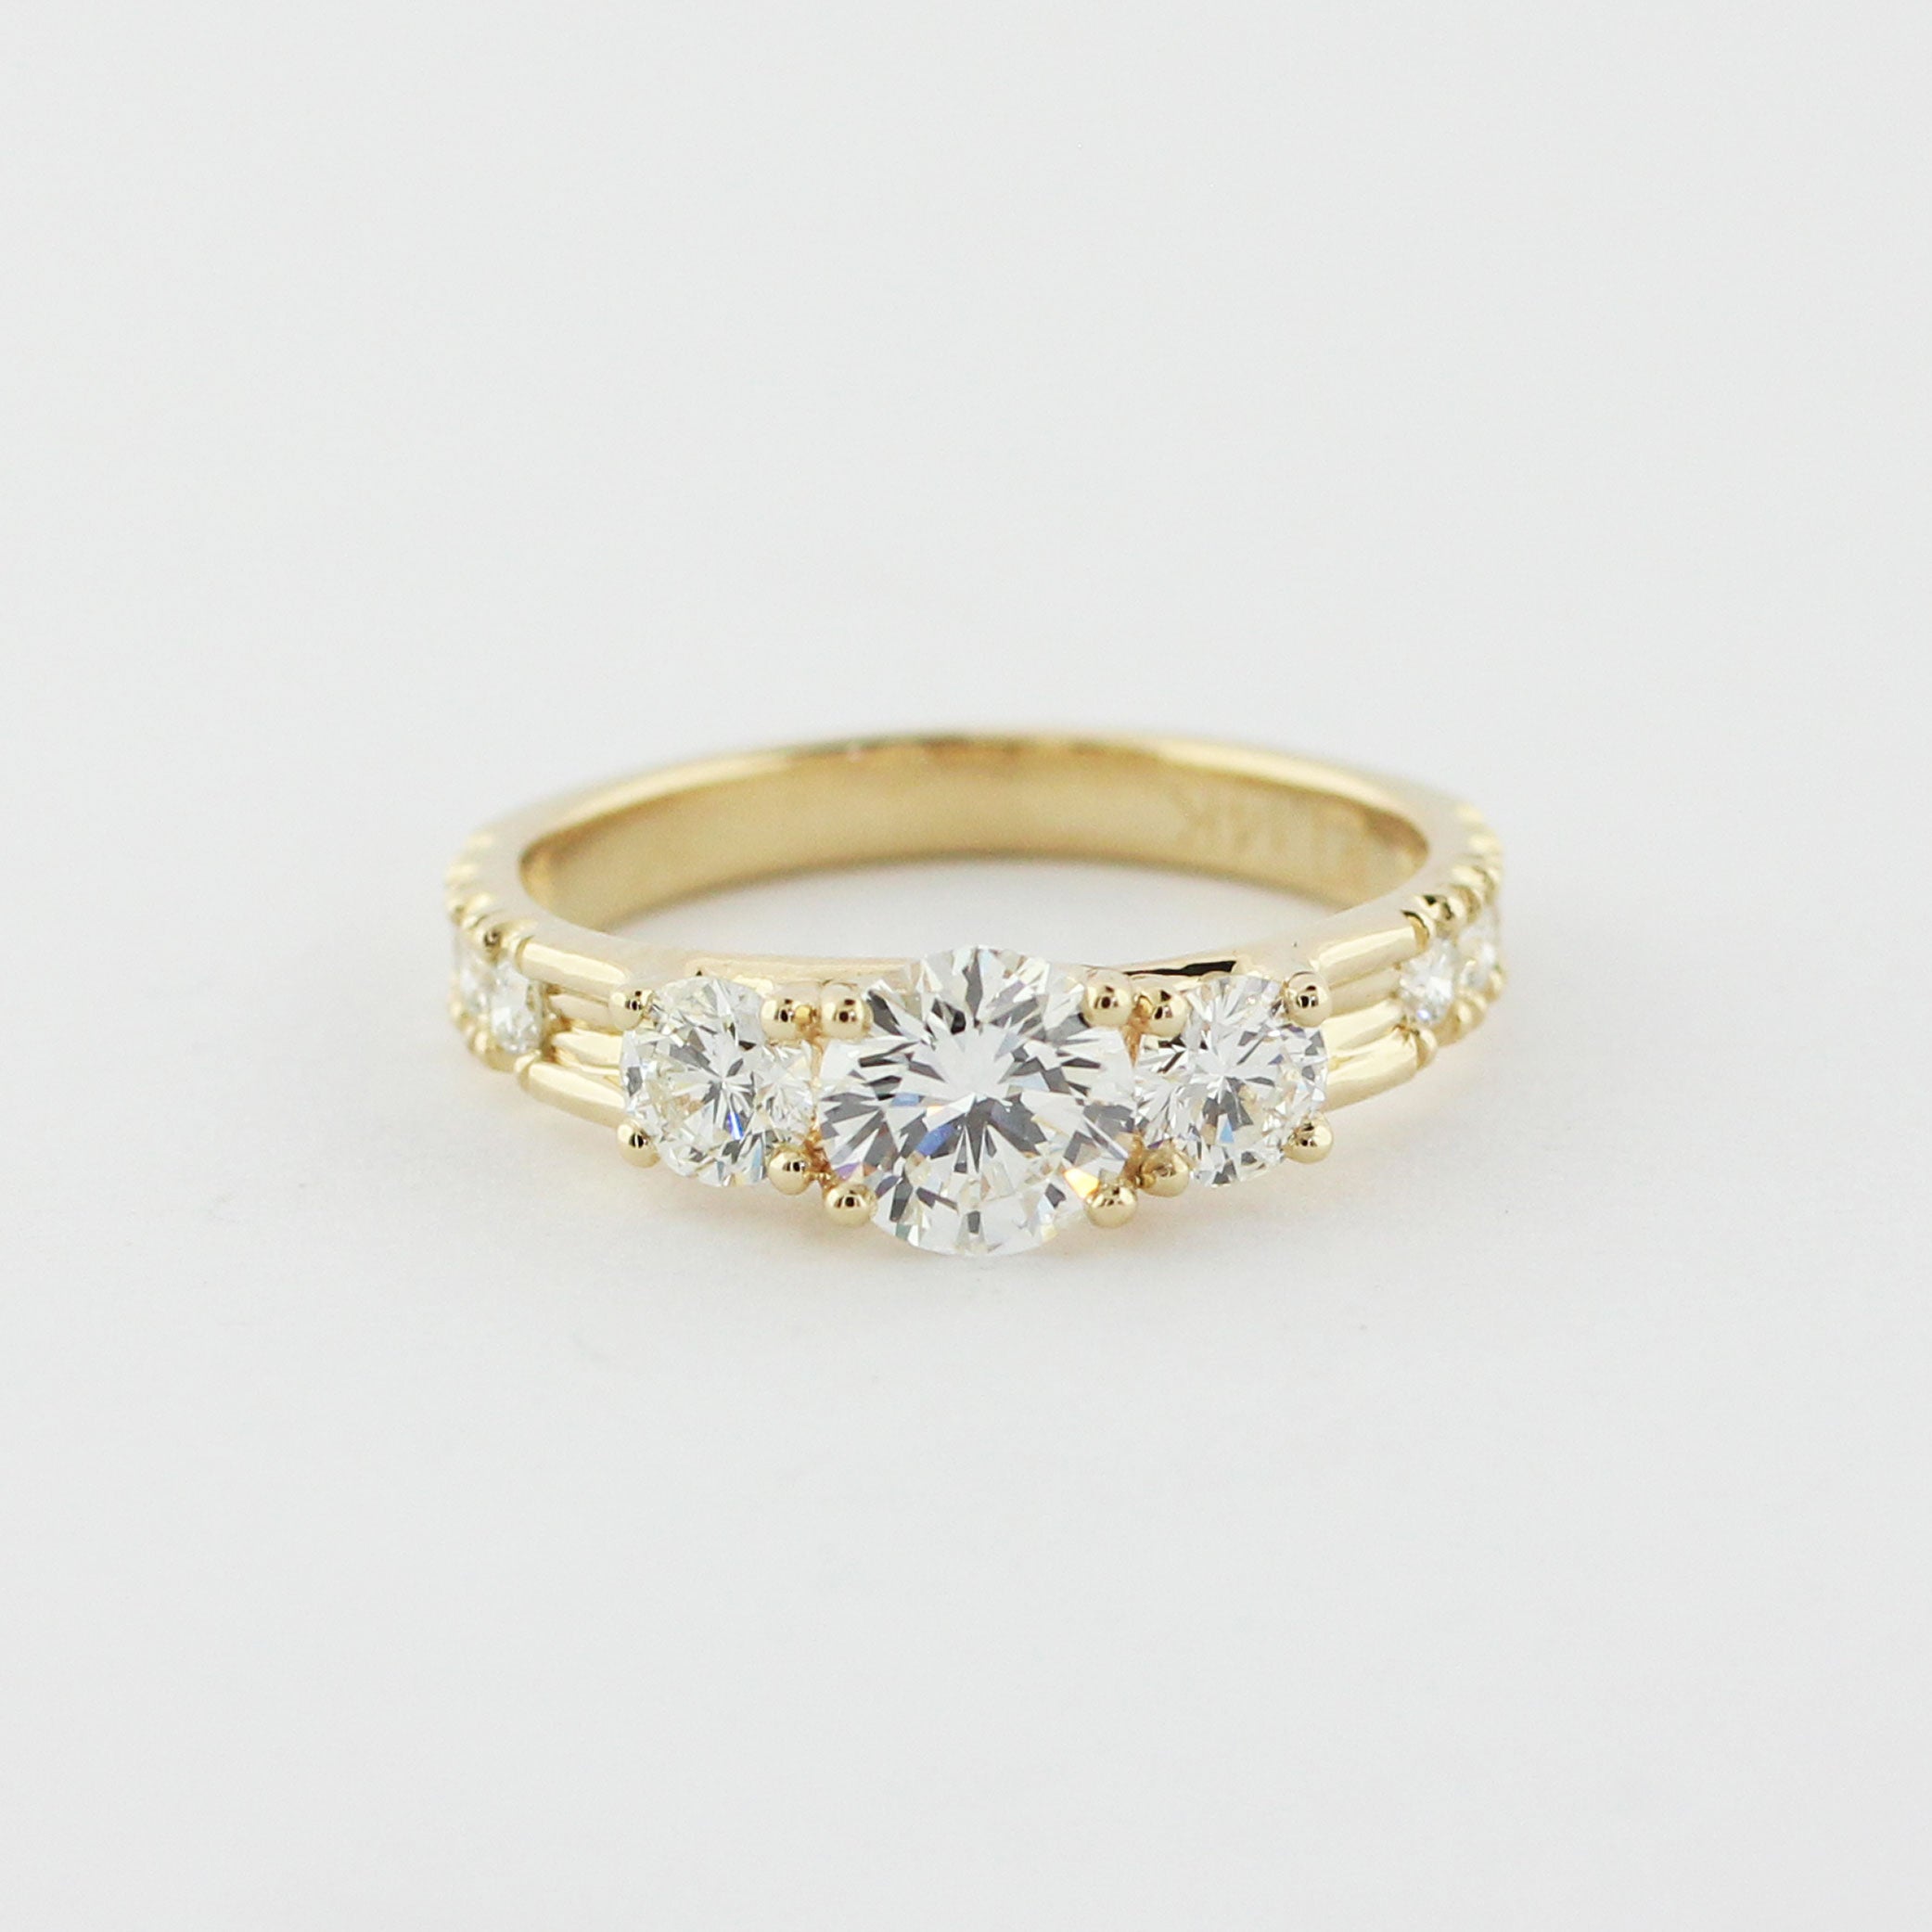 Custom 14k yellow gold three stone trellis ring with a round brilliant cut center diamond. Two prong-set accent diamonds are set on either side with a hand-cut scoop and split bead setting.